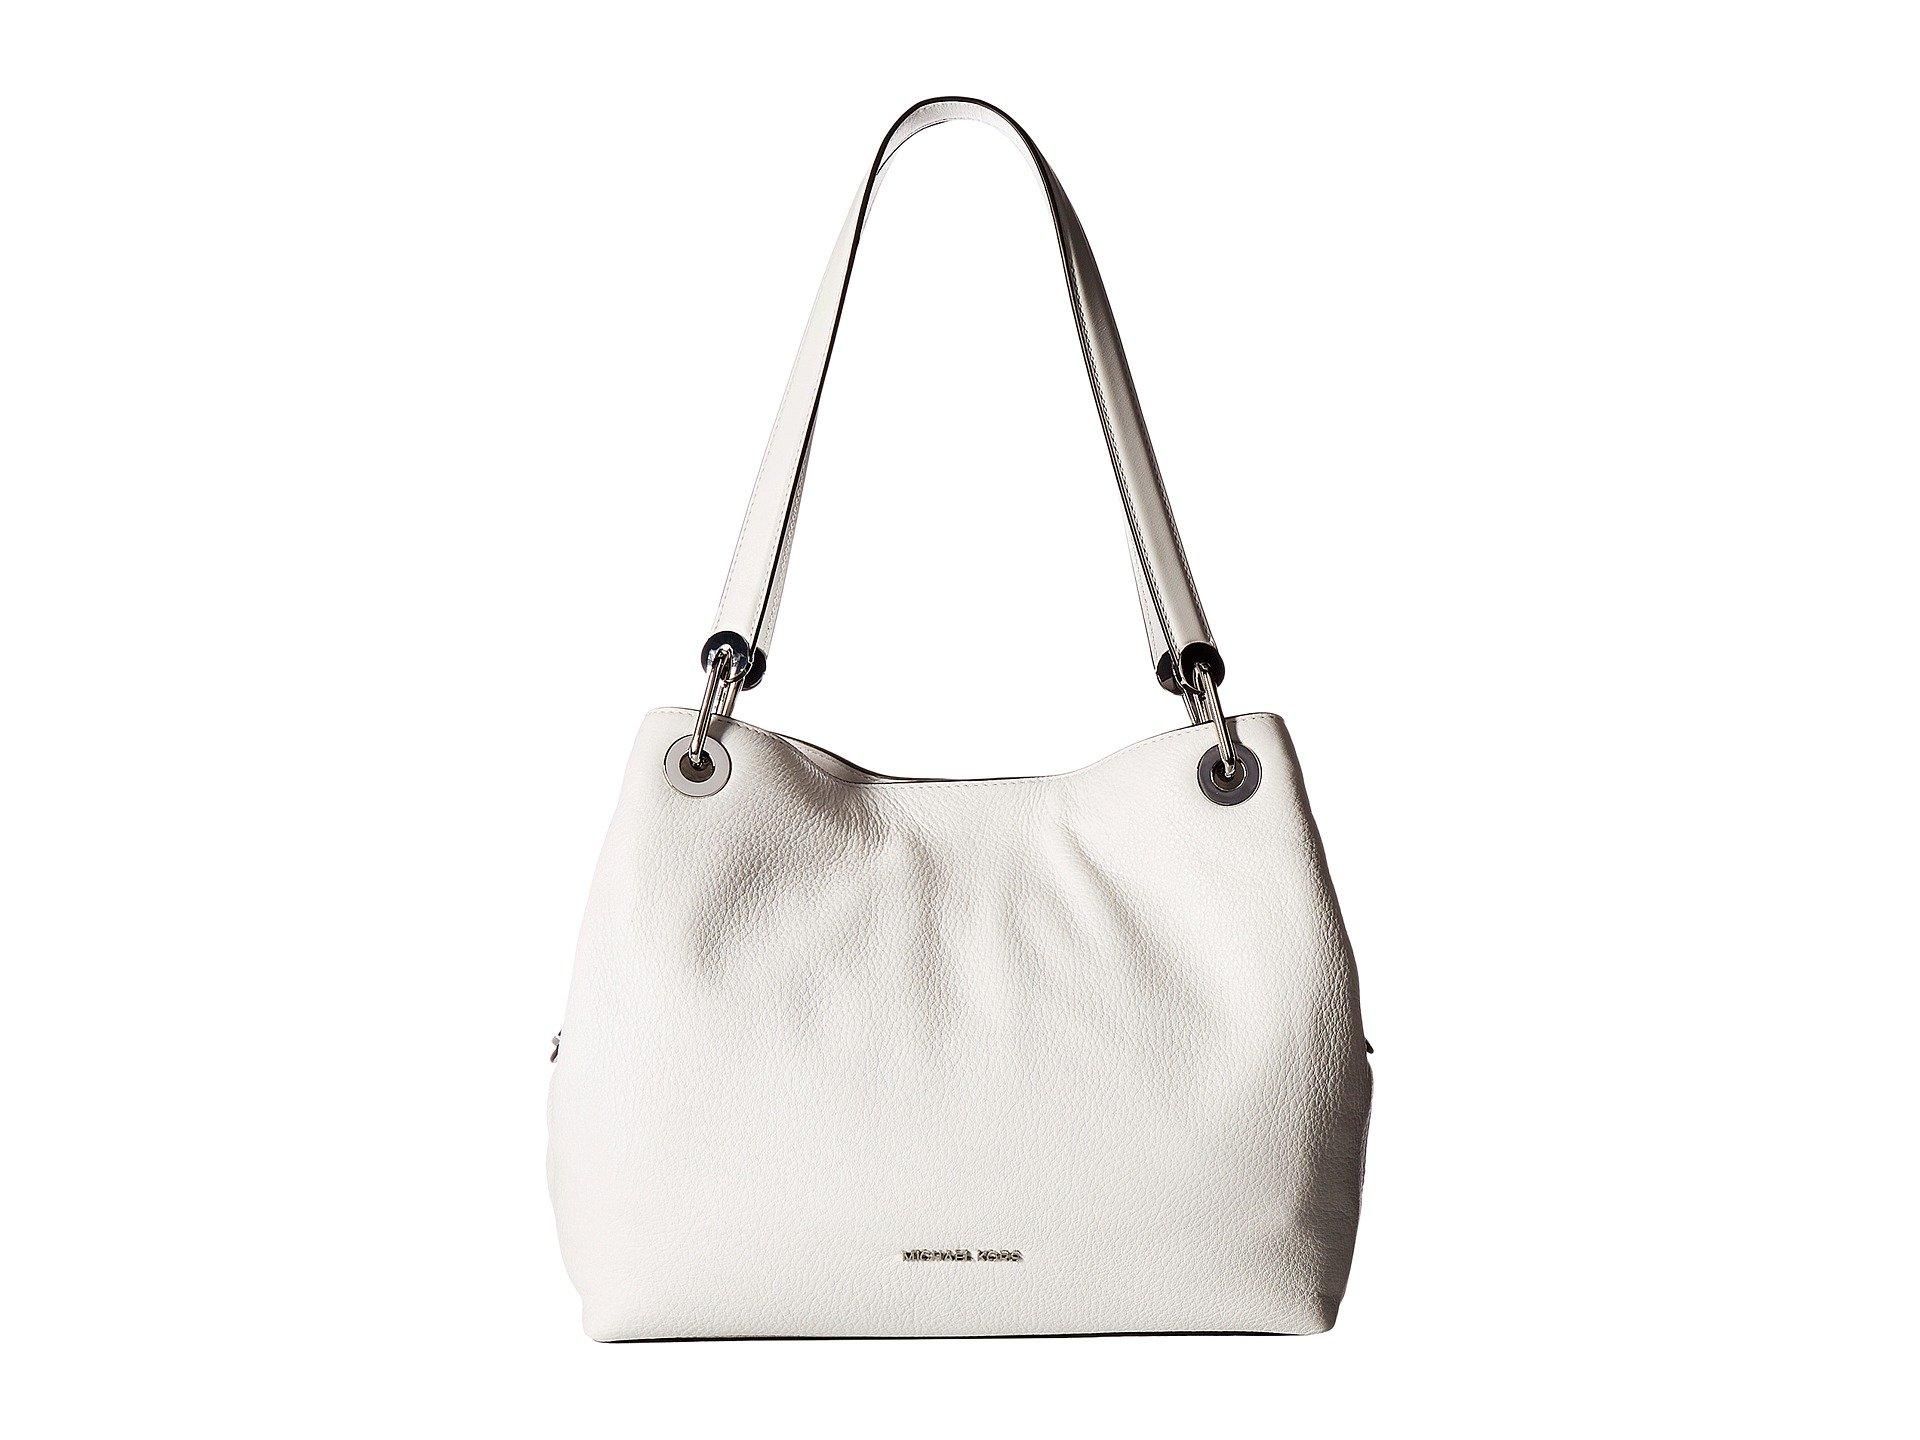 MICHAEL Kors Raven Large Pebbled Leather Tote in White |